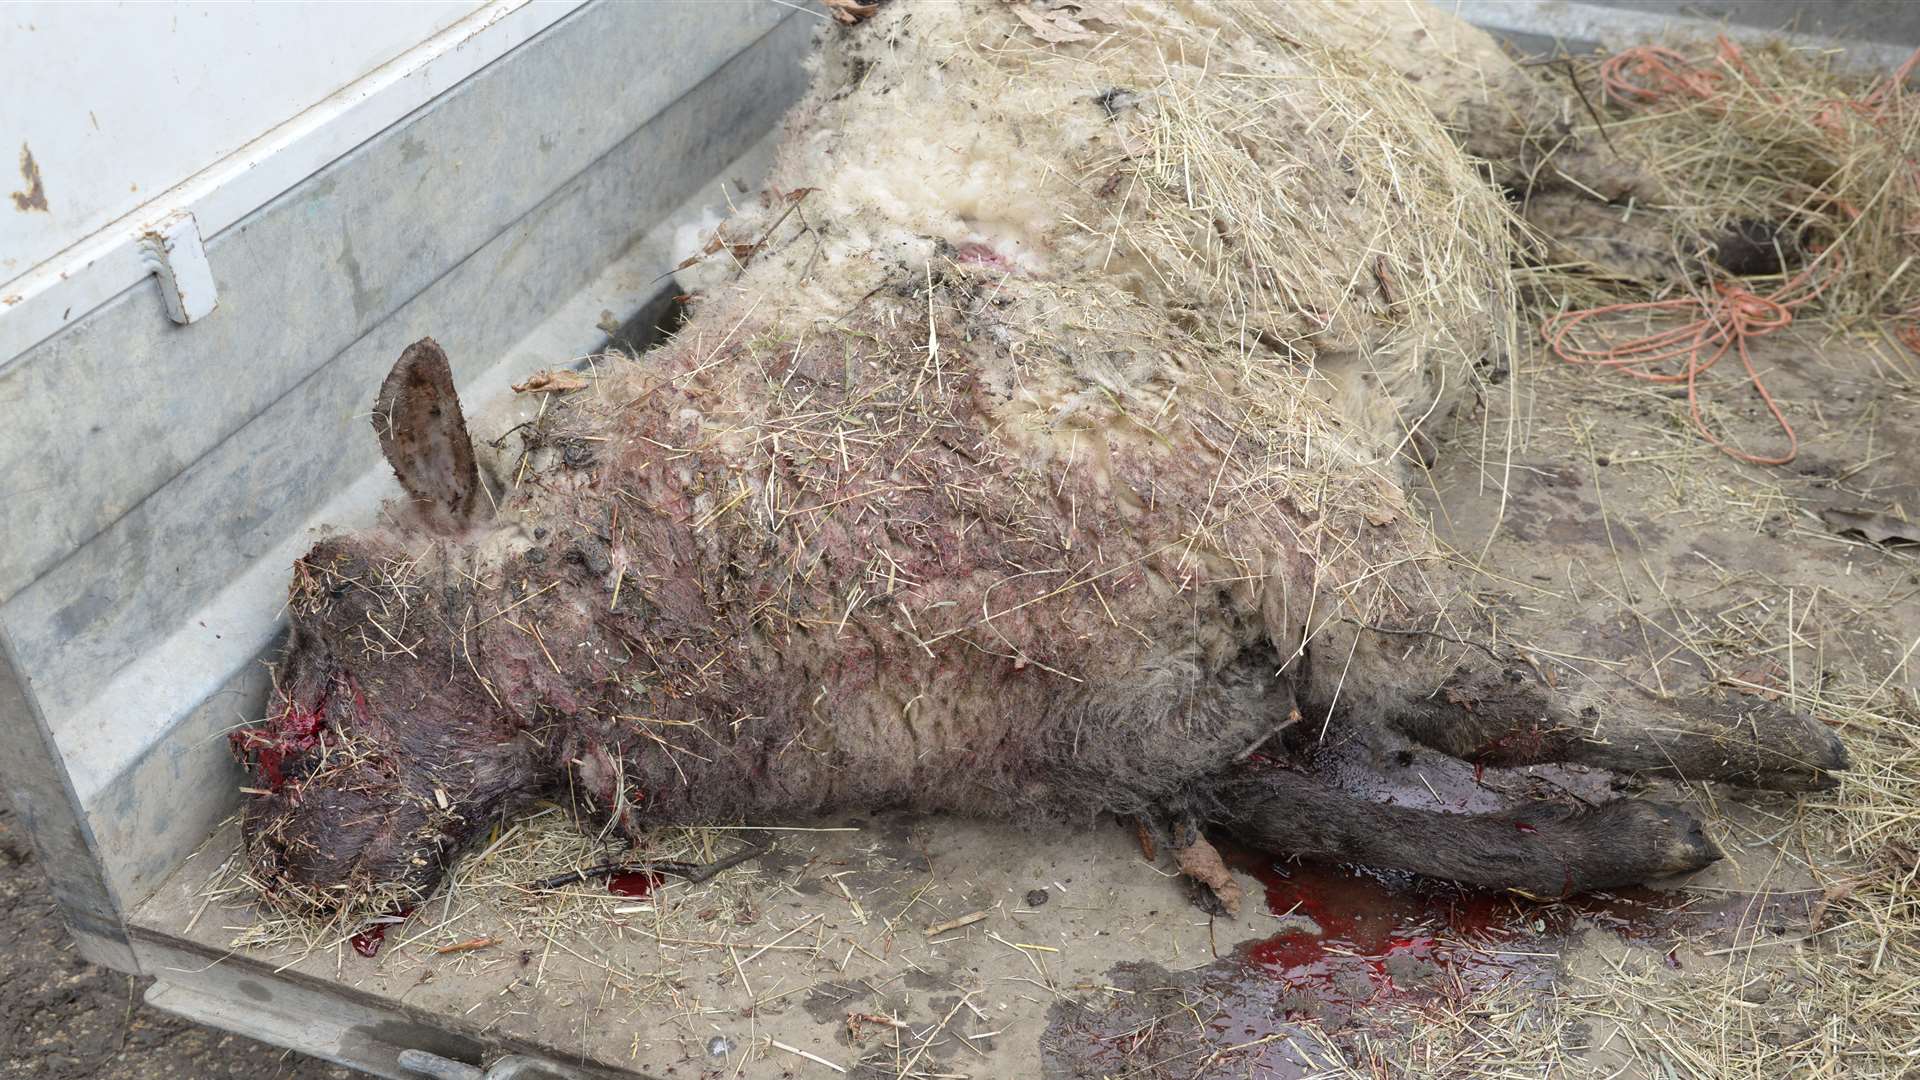 The sheep had to be shot after being attacked by a dog